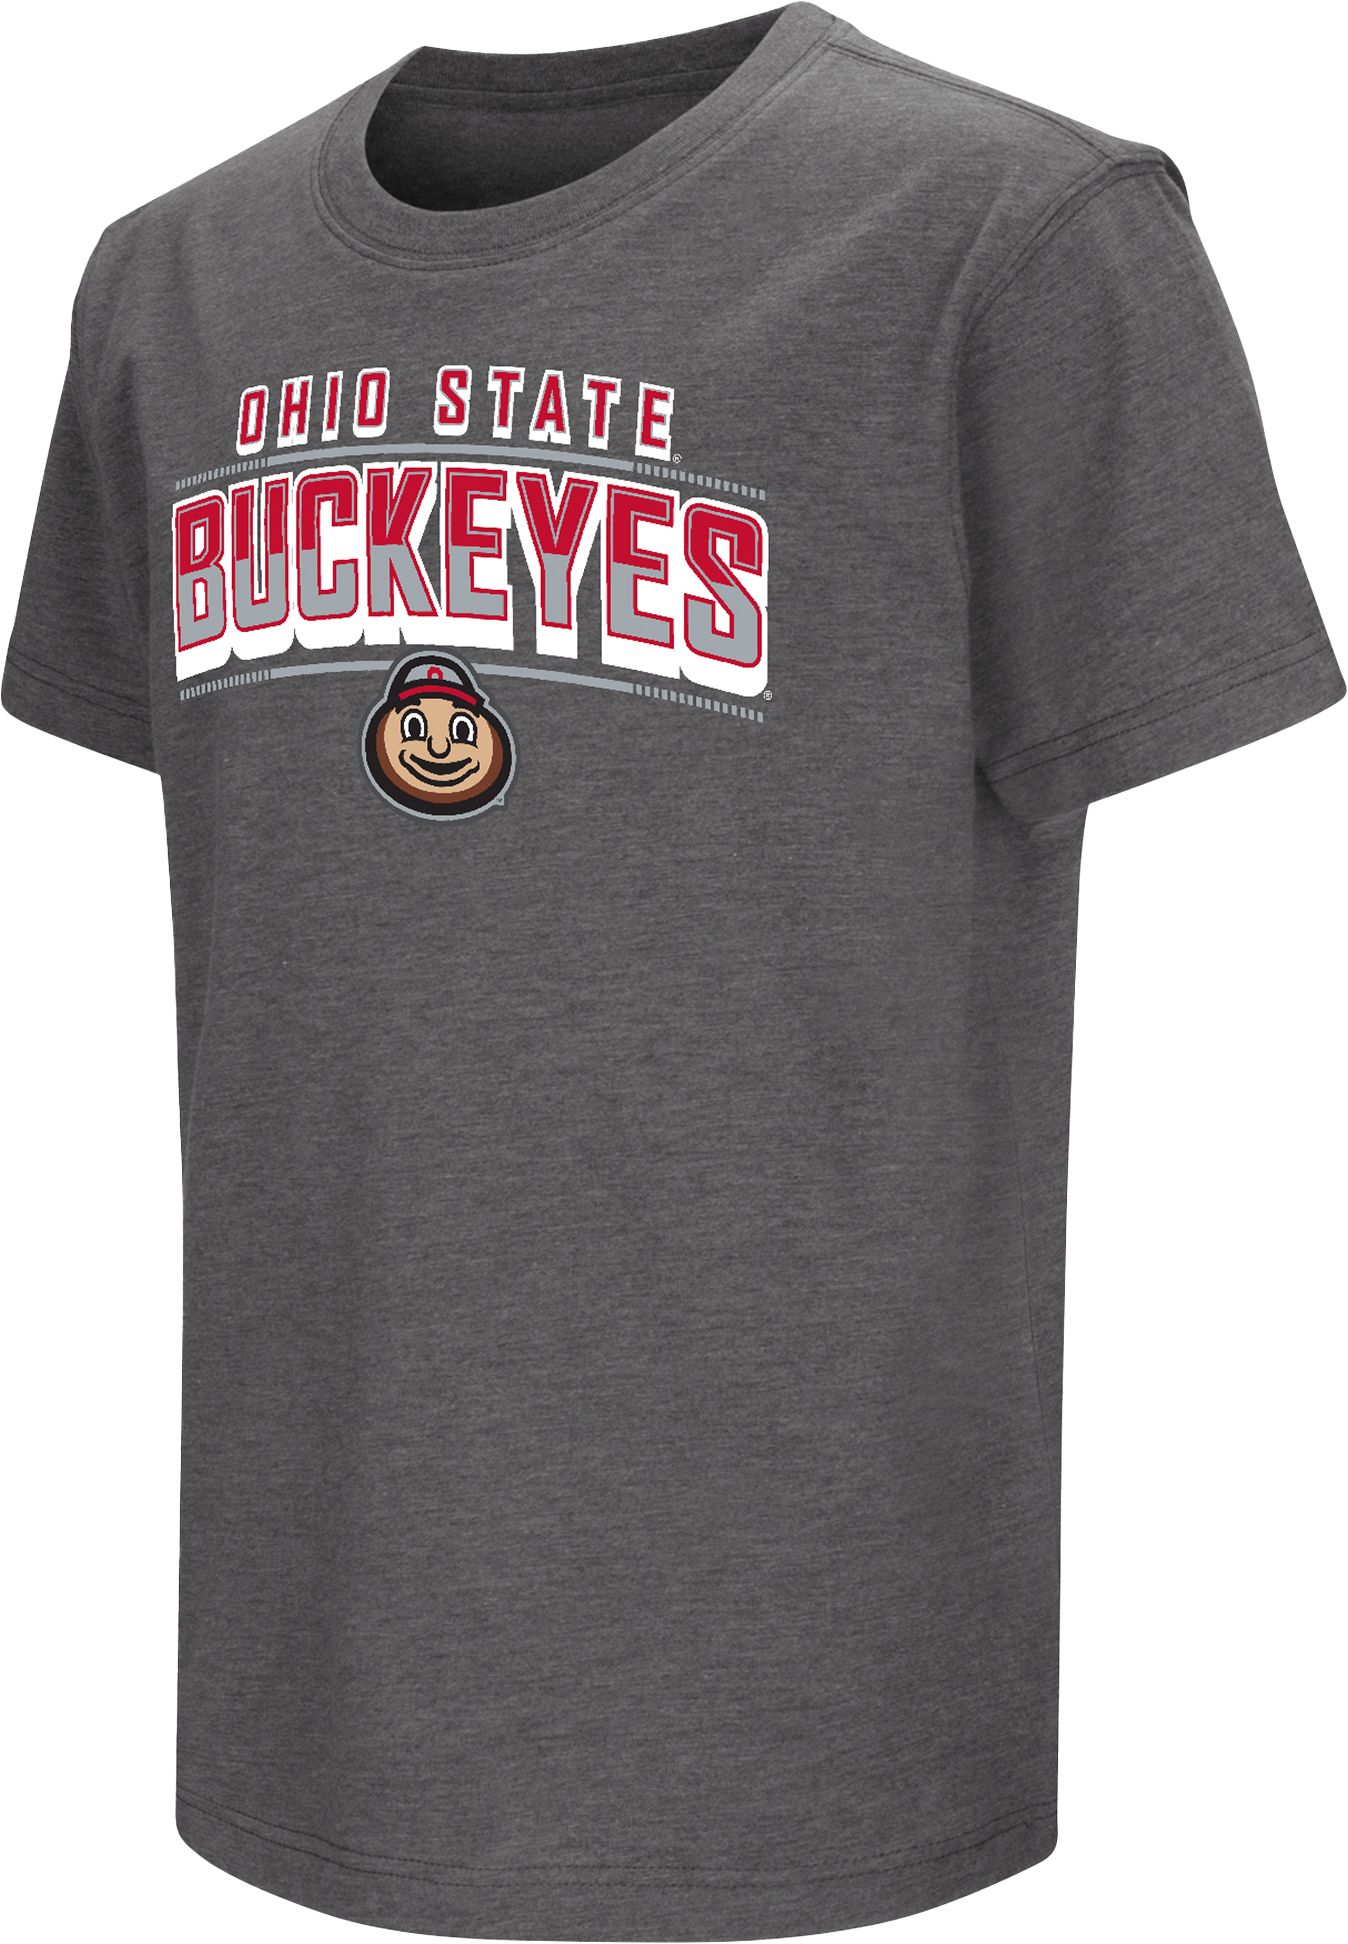 Colosseum Youth Ohio State Buckeyes Promo T-Shirt